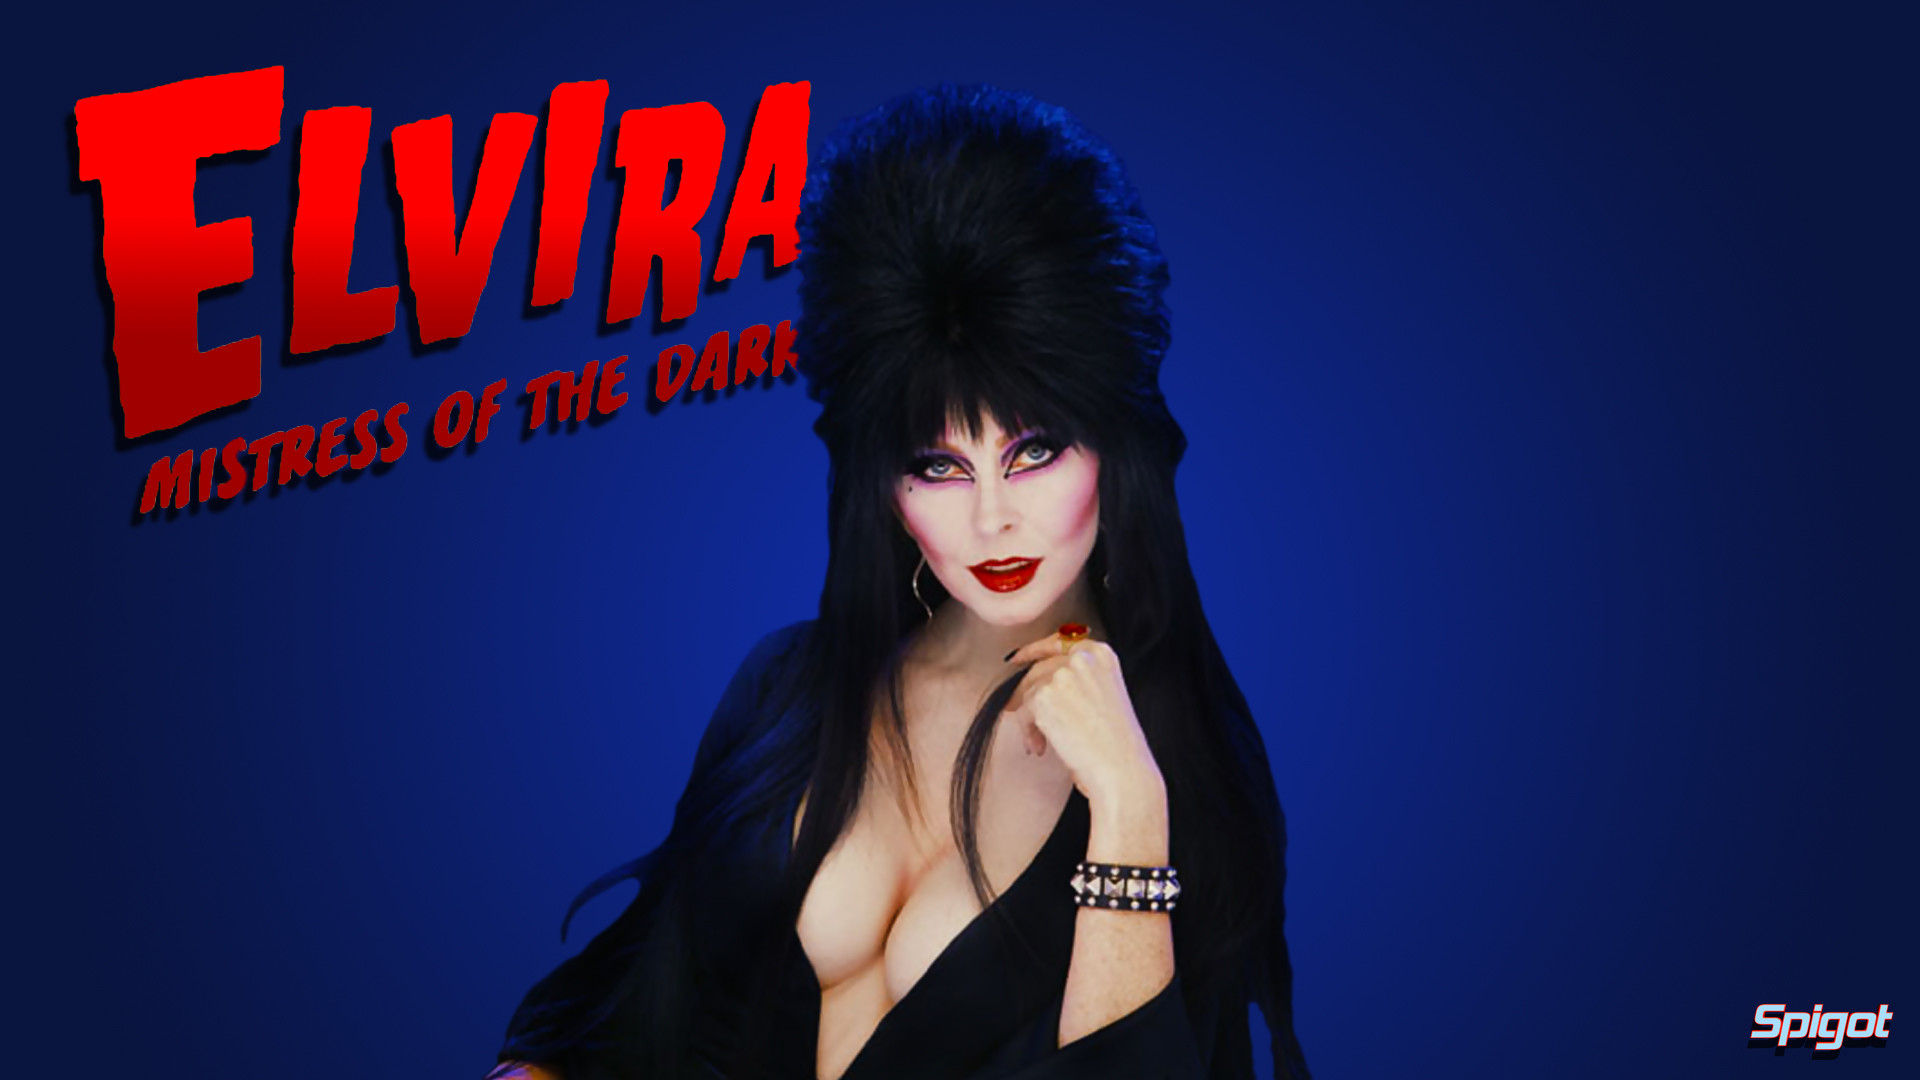 A picture of elvira